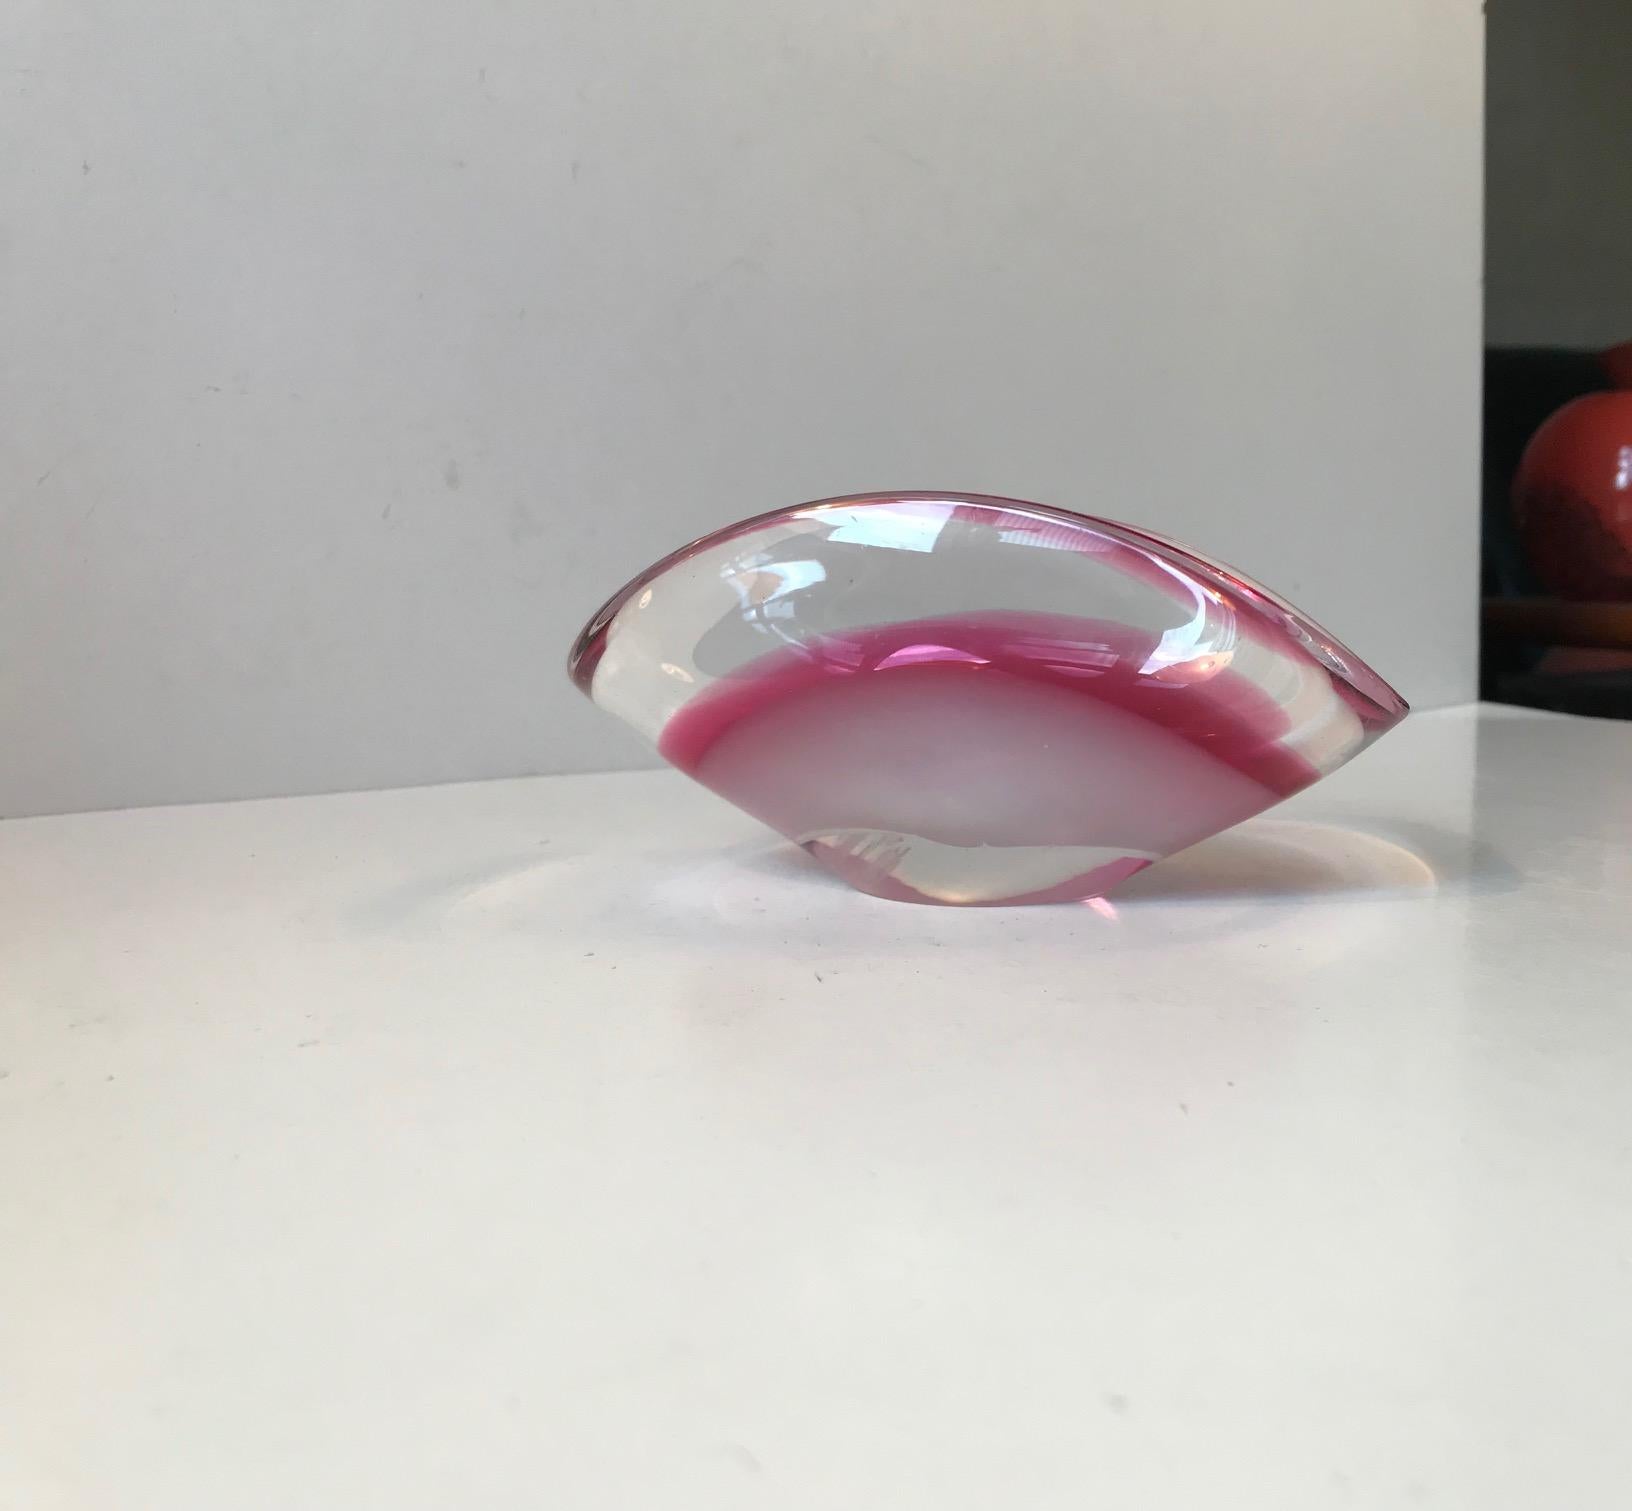 This 3-color glass bowl comes in a folded design. It was designed during the 1950s by Paul Kedelv and manufactured by Flygfors in Sweden. The bowl is inscribed Flygfors, Coquille to the base.